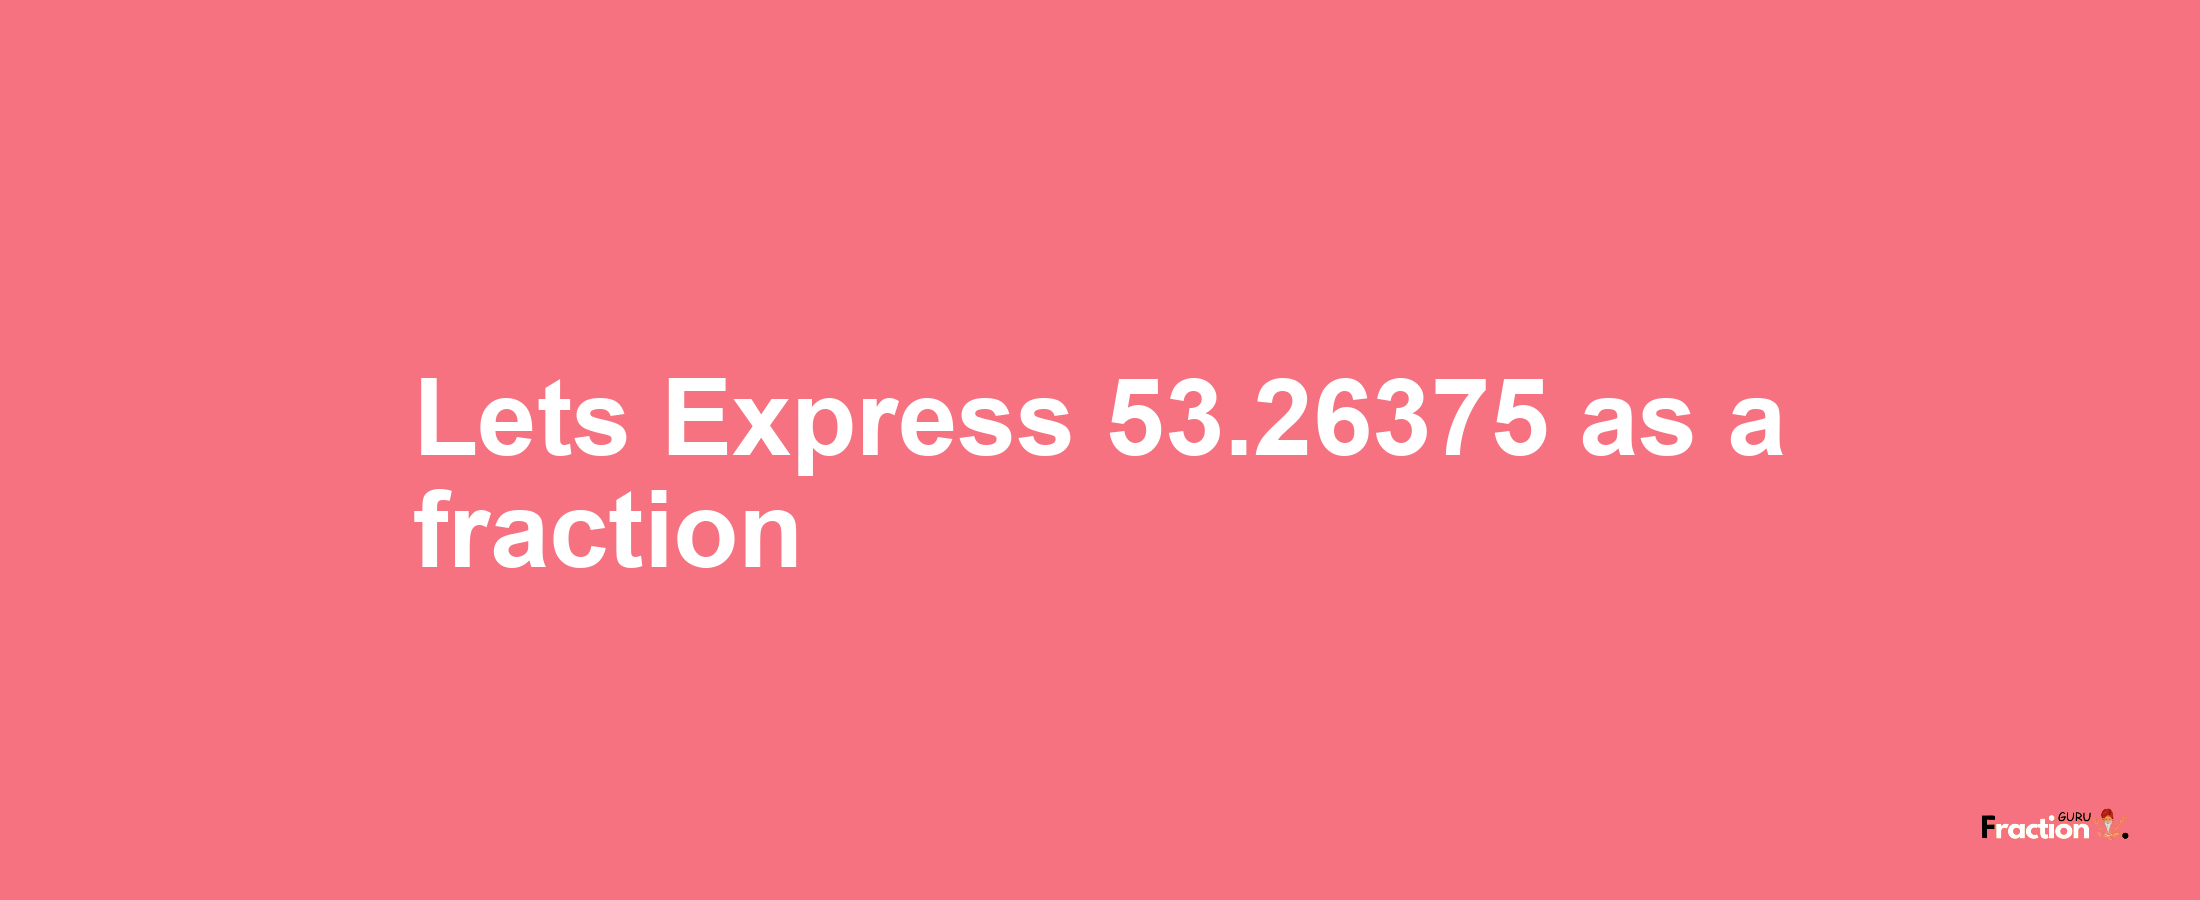 Lets Express 53.26375 as afraction